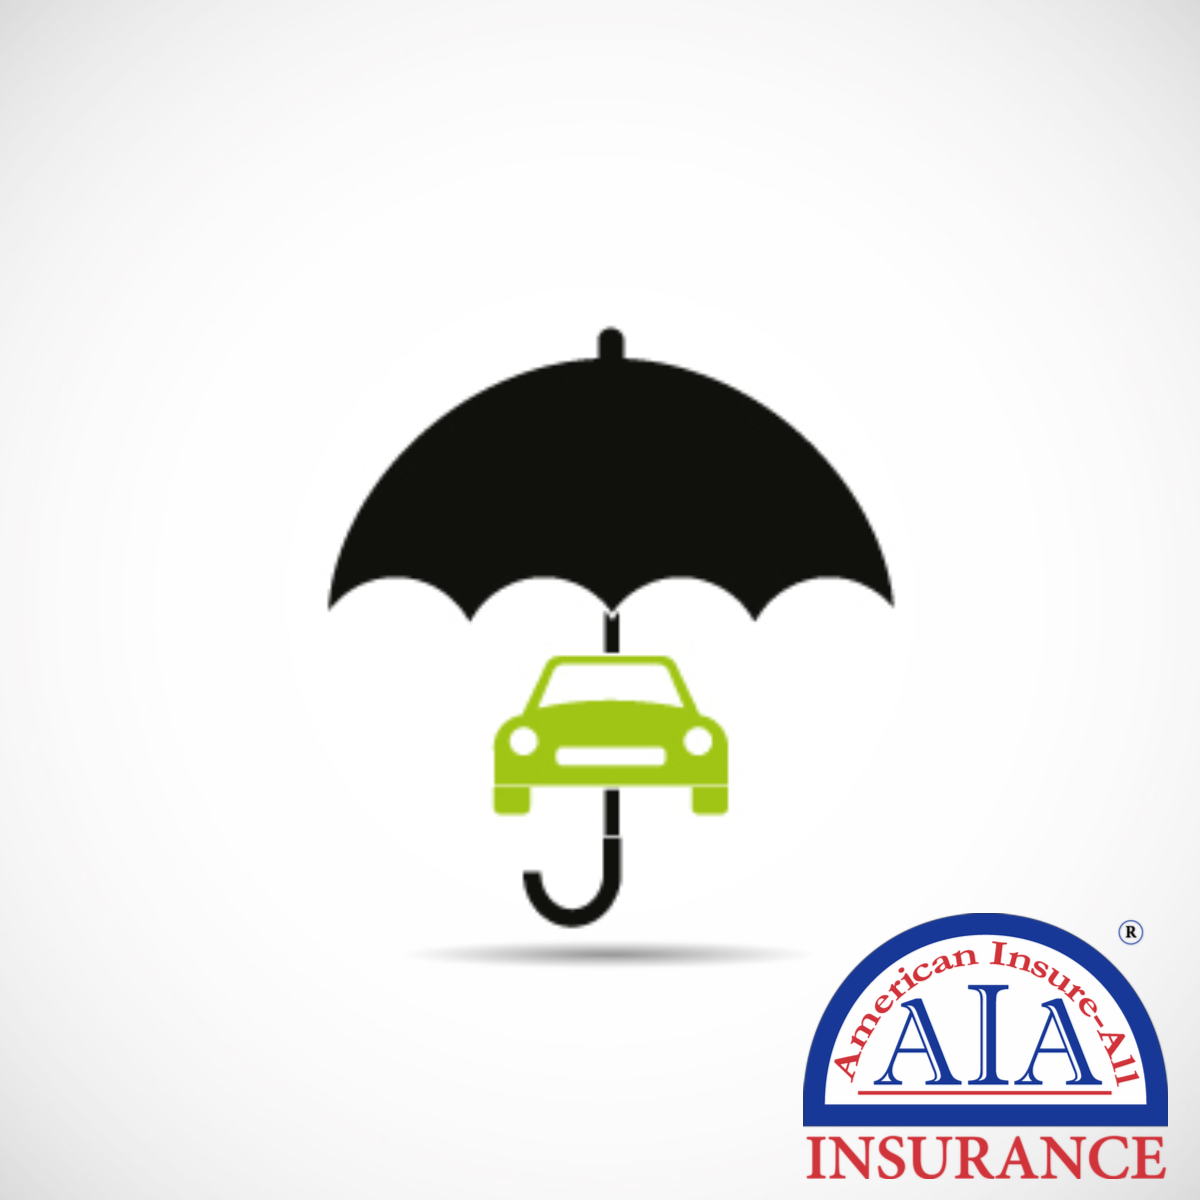 American Insure-All® Works to Provide the Best Car Insurance Near Snohomish!